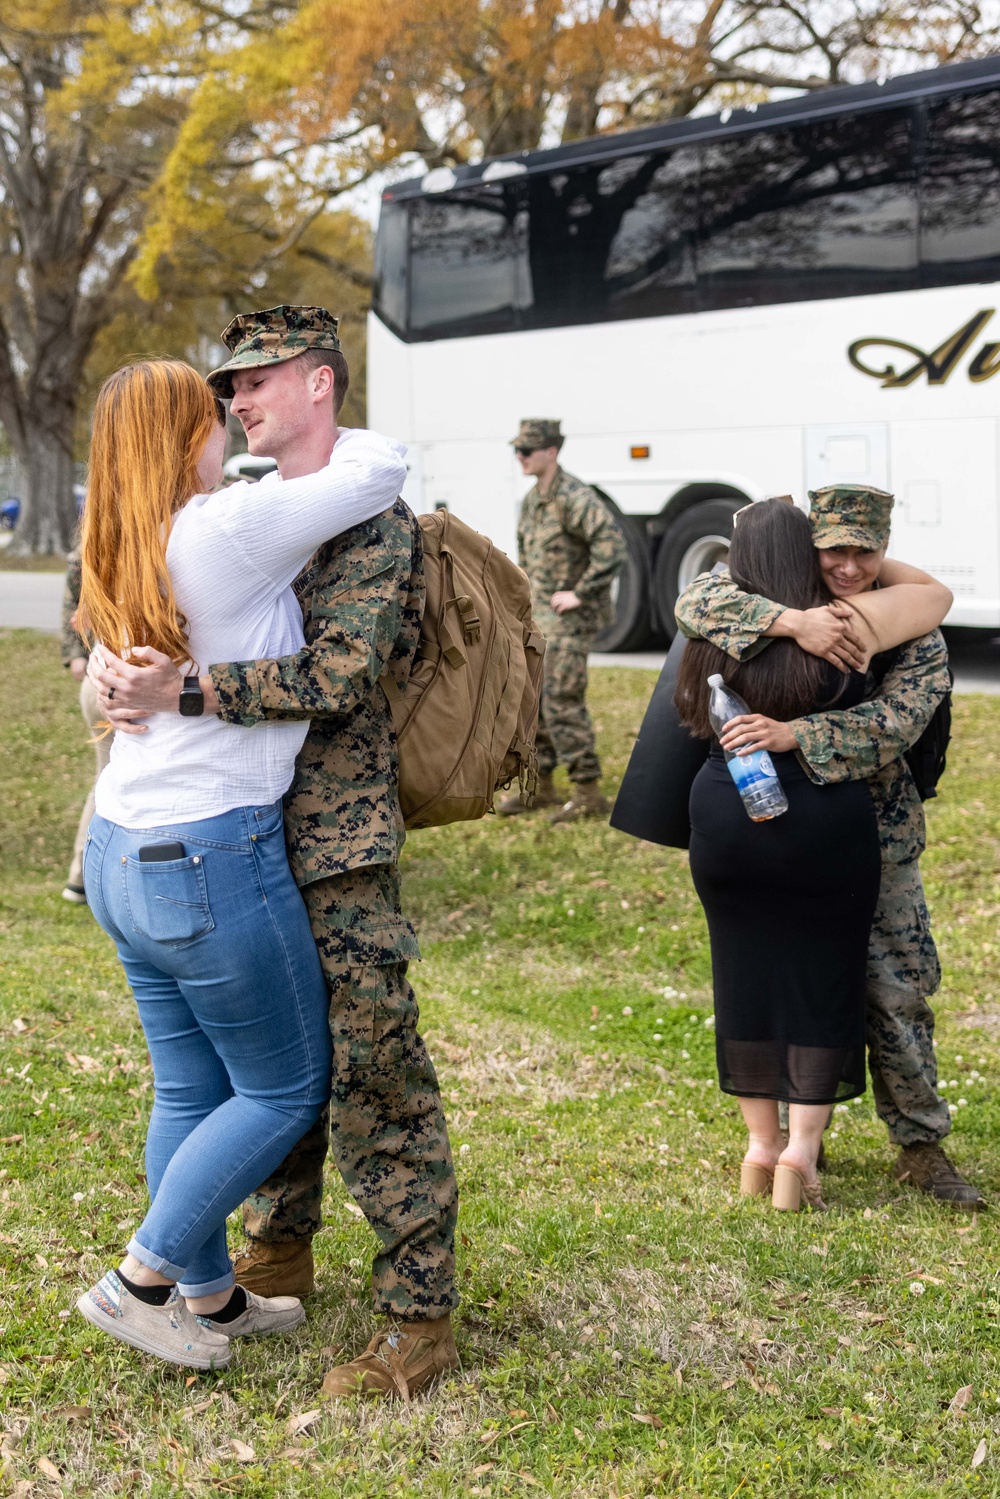 26th MEU(SOC) Marines and Sailors embarked on the USS Mesa Verde (LPD 19) arrive in Morehead City after eight-month Deployment as the Tri-GCC Immediate Crisis Response Force